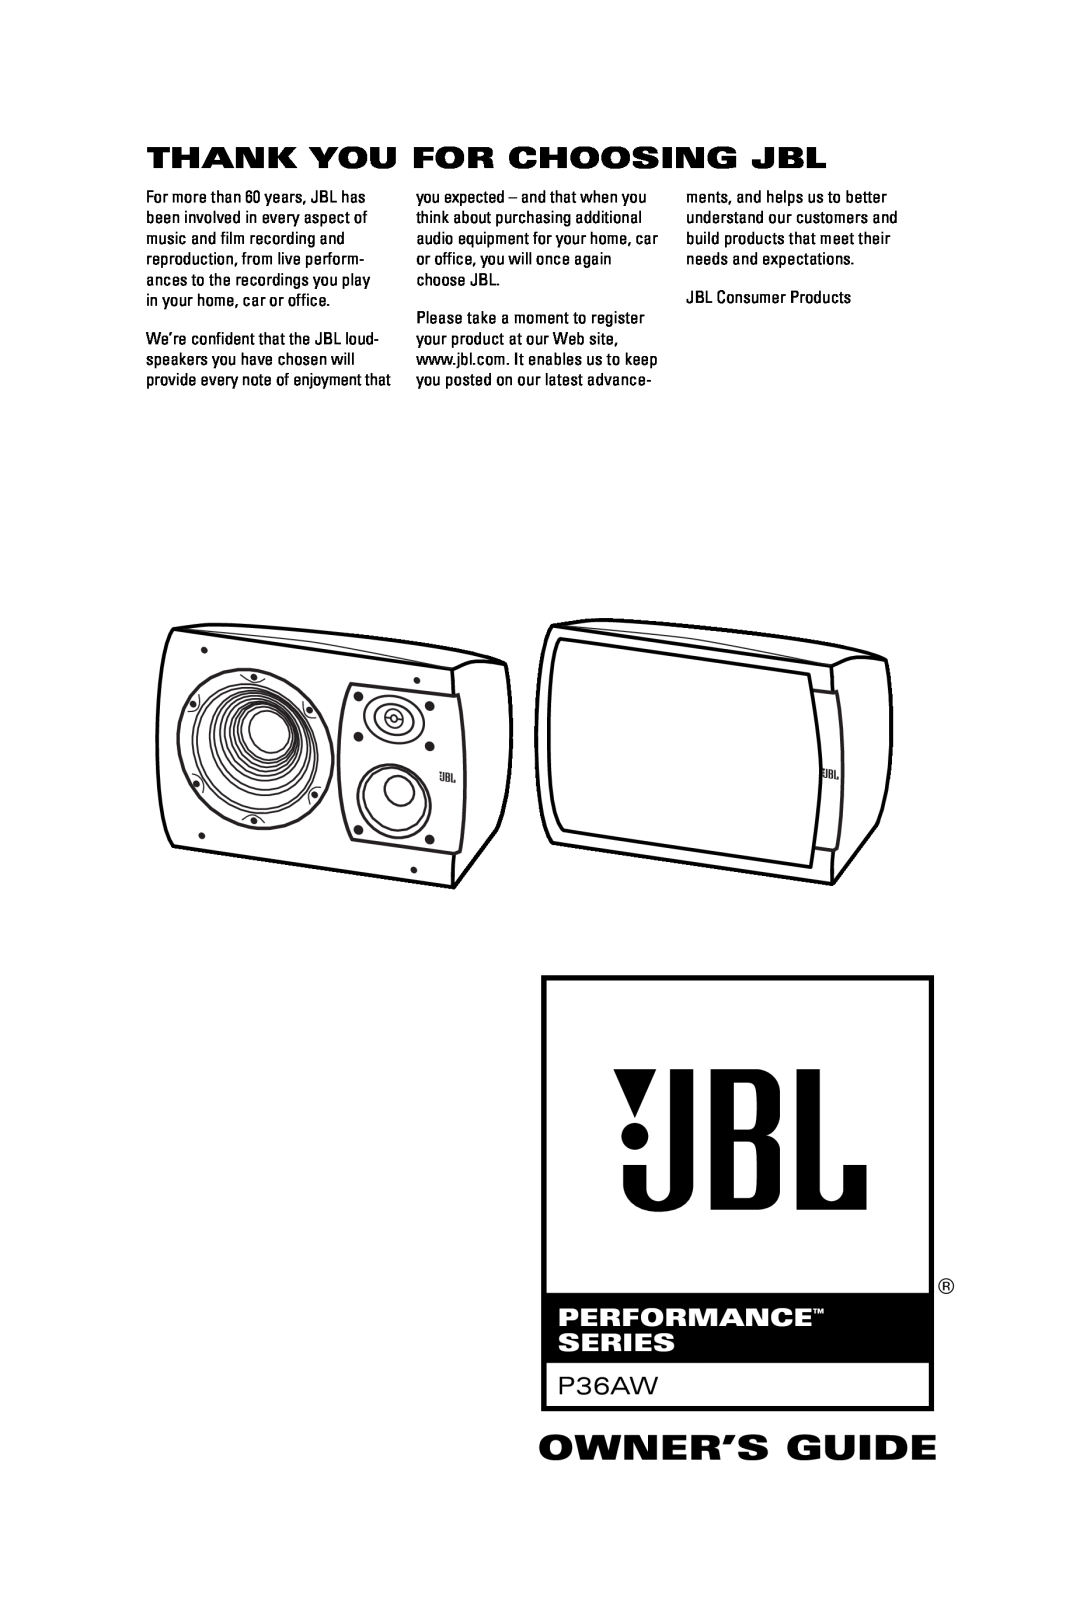 JBL P36AW manual Thank You For Choosing Jbl, Owner’S Guide, Performance Series 